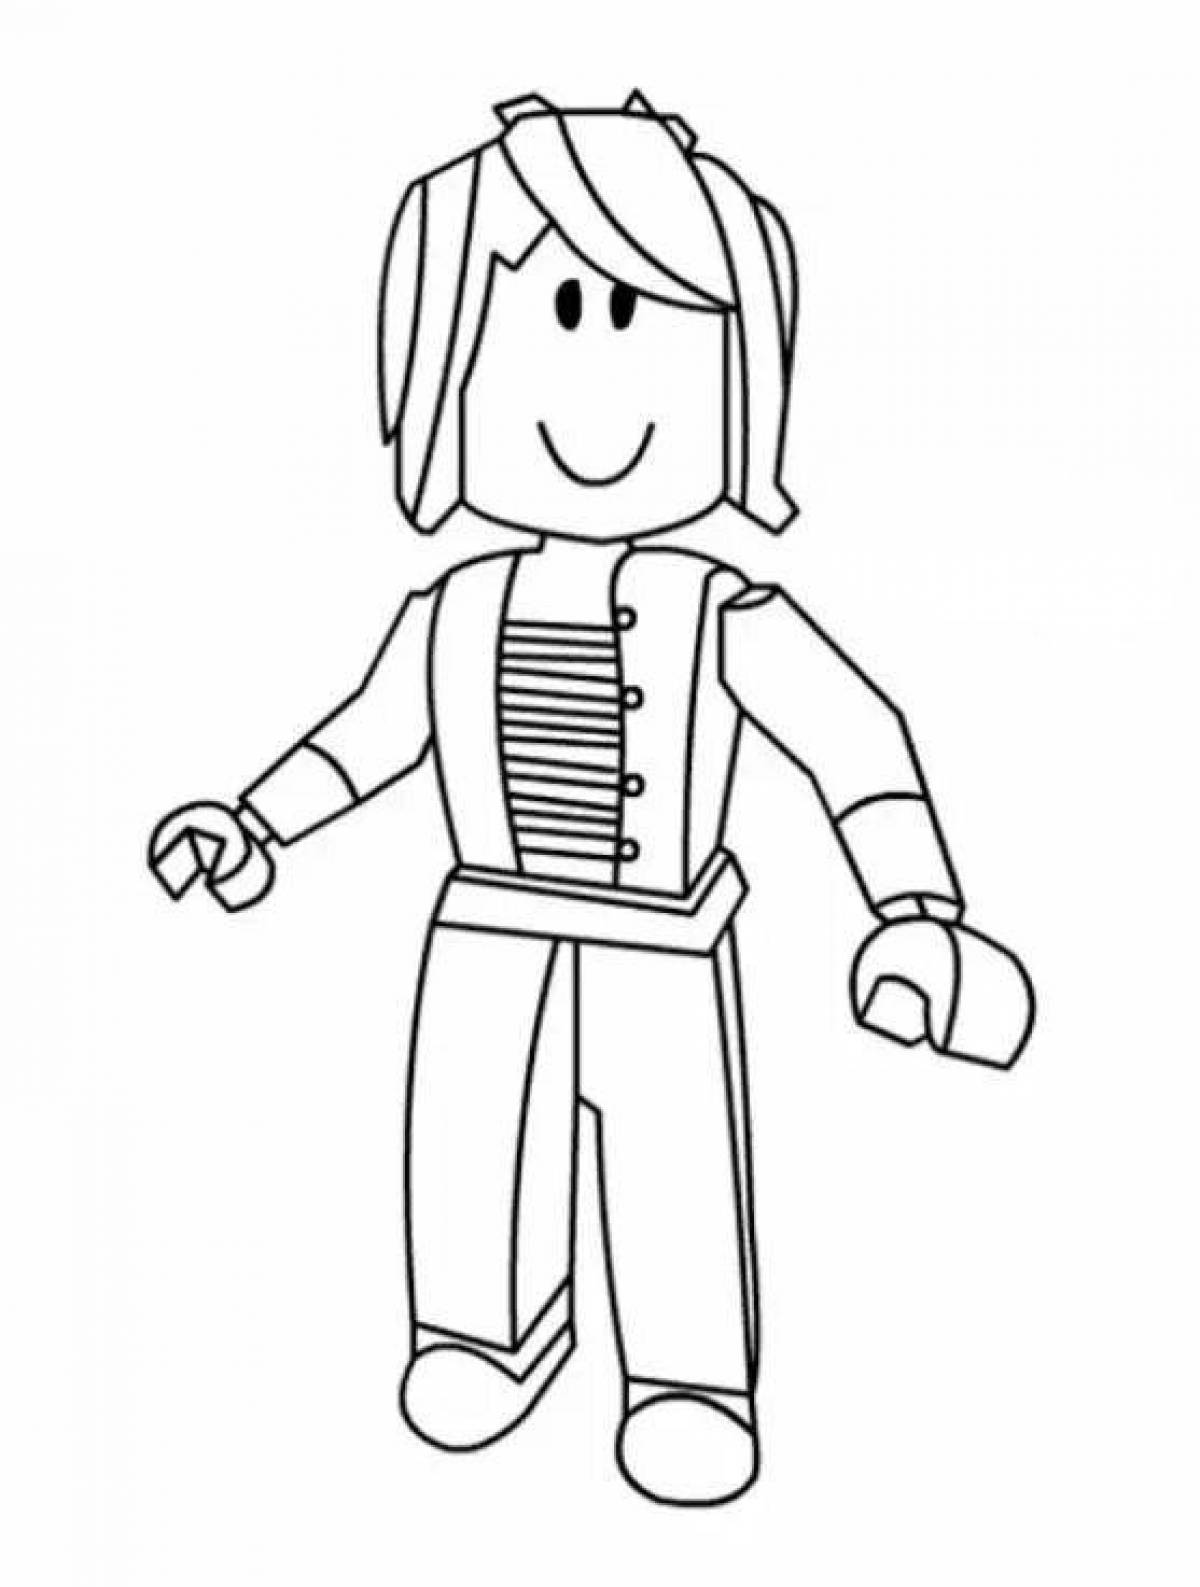 Roblox character coloring